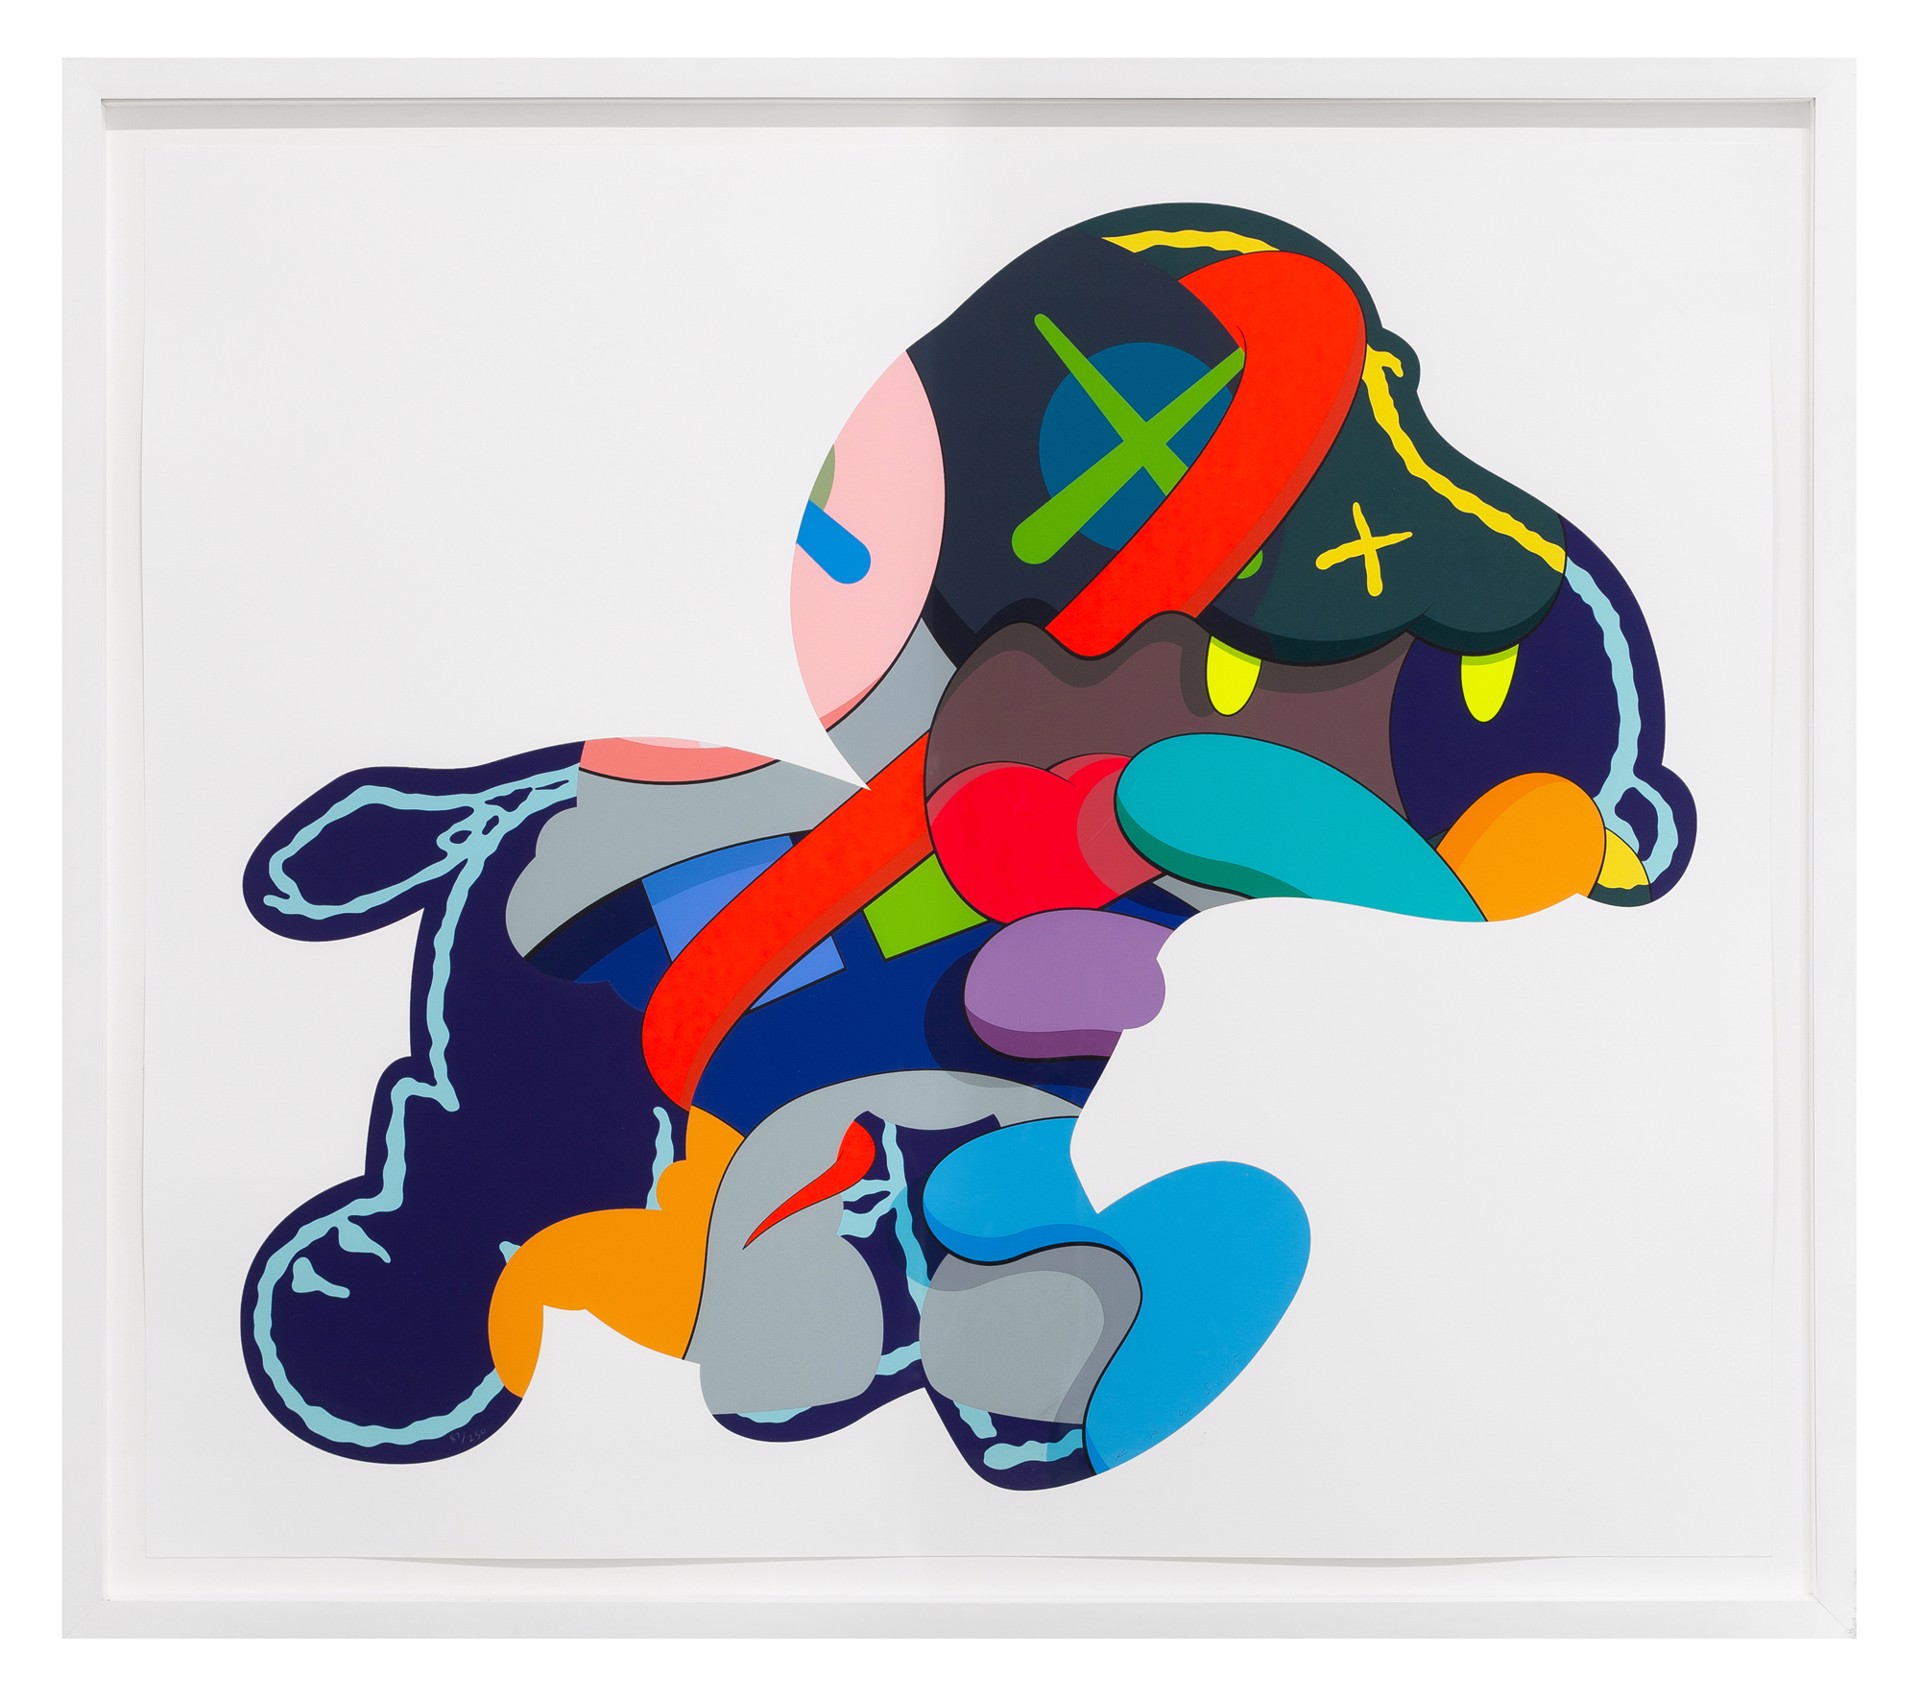 NO ONE'S HOME, STAY STEADY, THE THINGS THAT COMFORT by KAWS